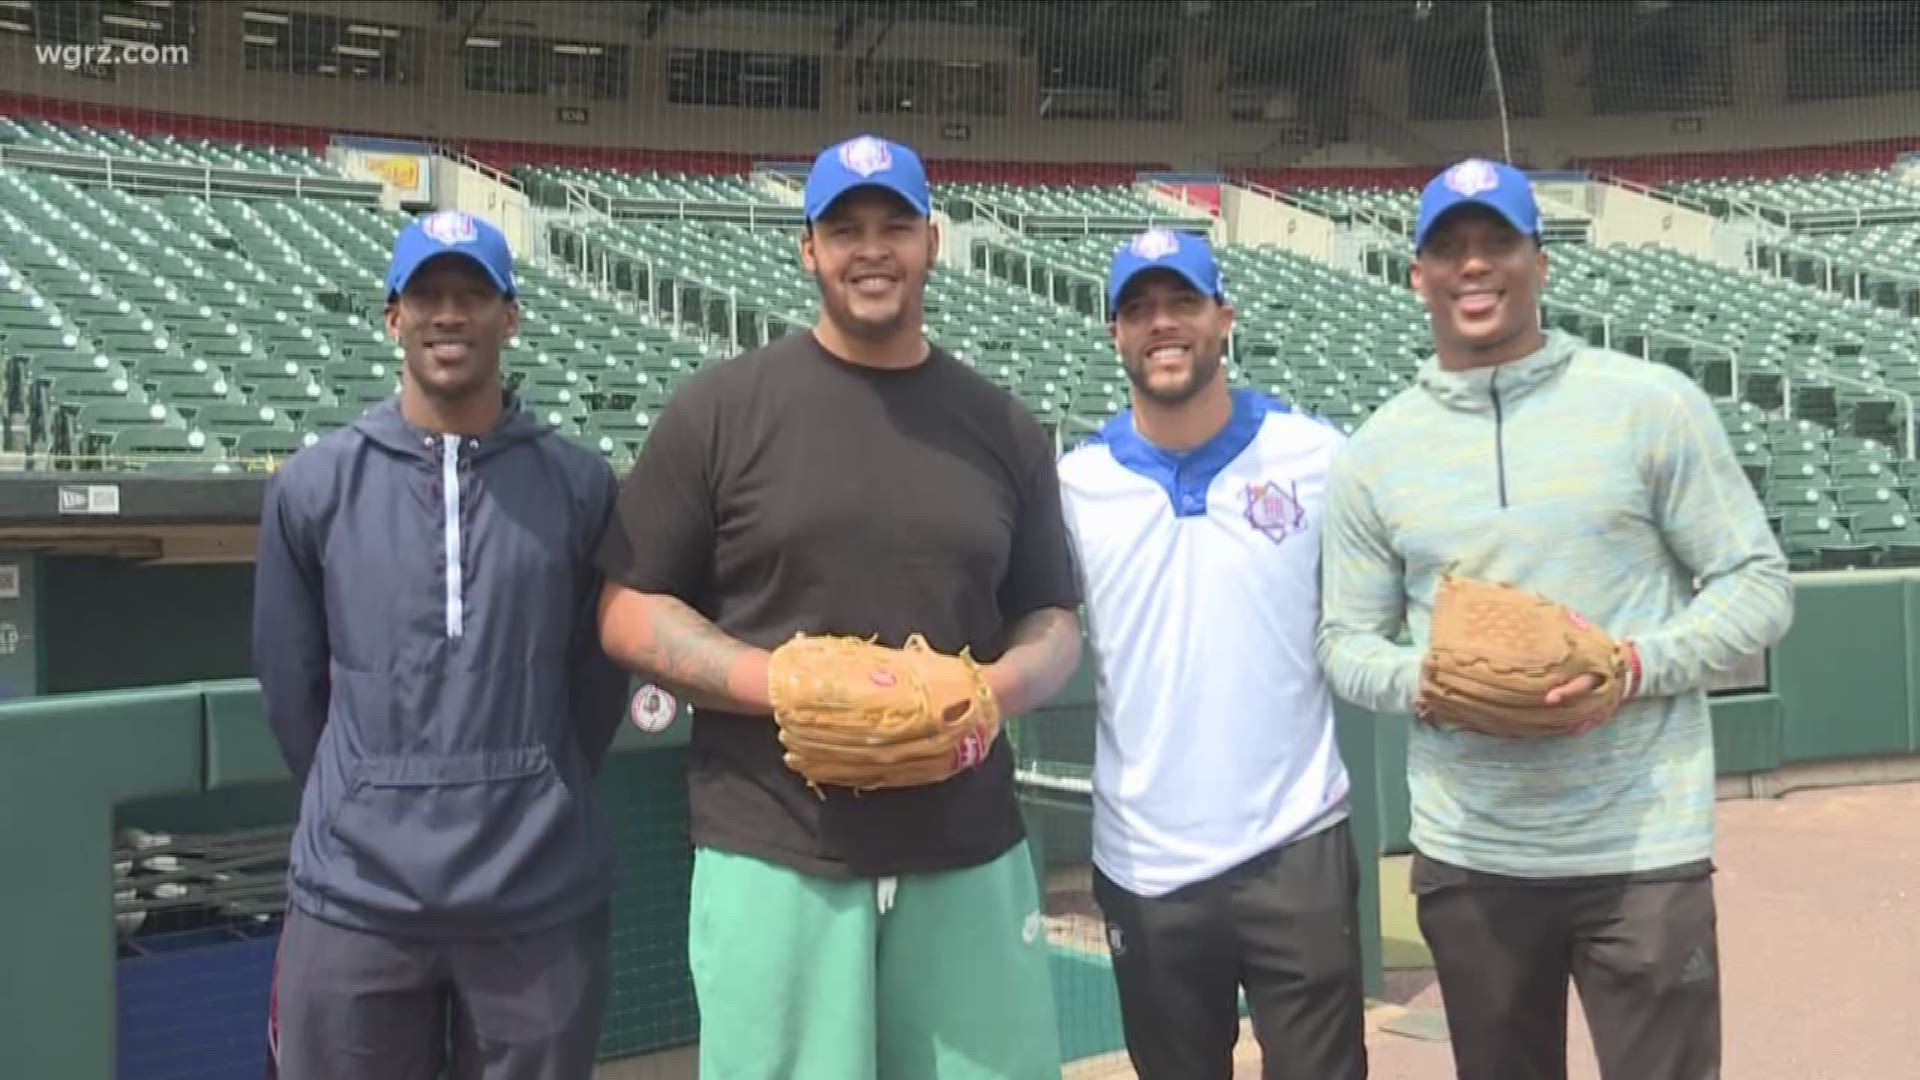 Micah Hyde excited to give back with his charity softball game at Sahlen Field